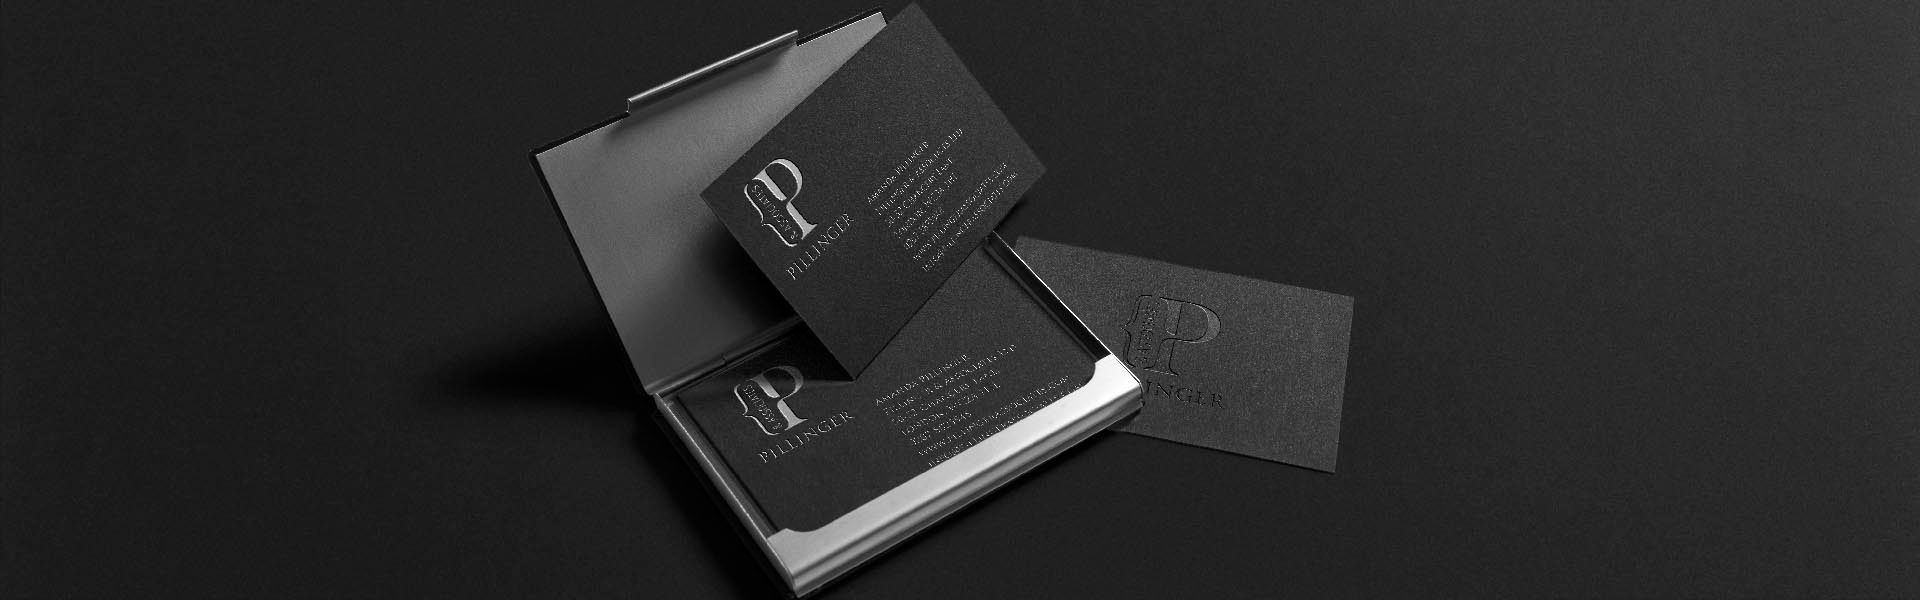 a black business card with the pillinger & associates logo on it